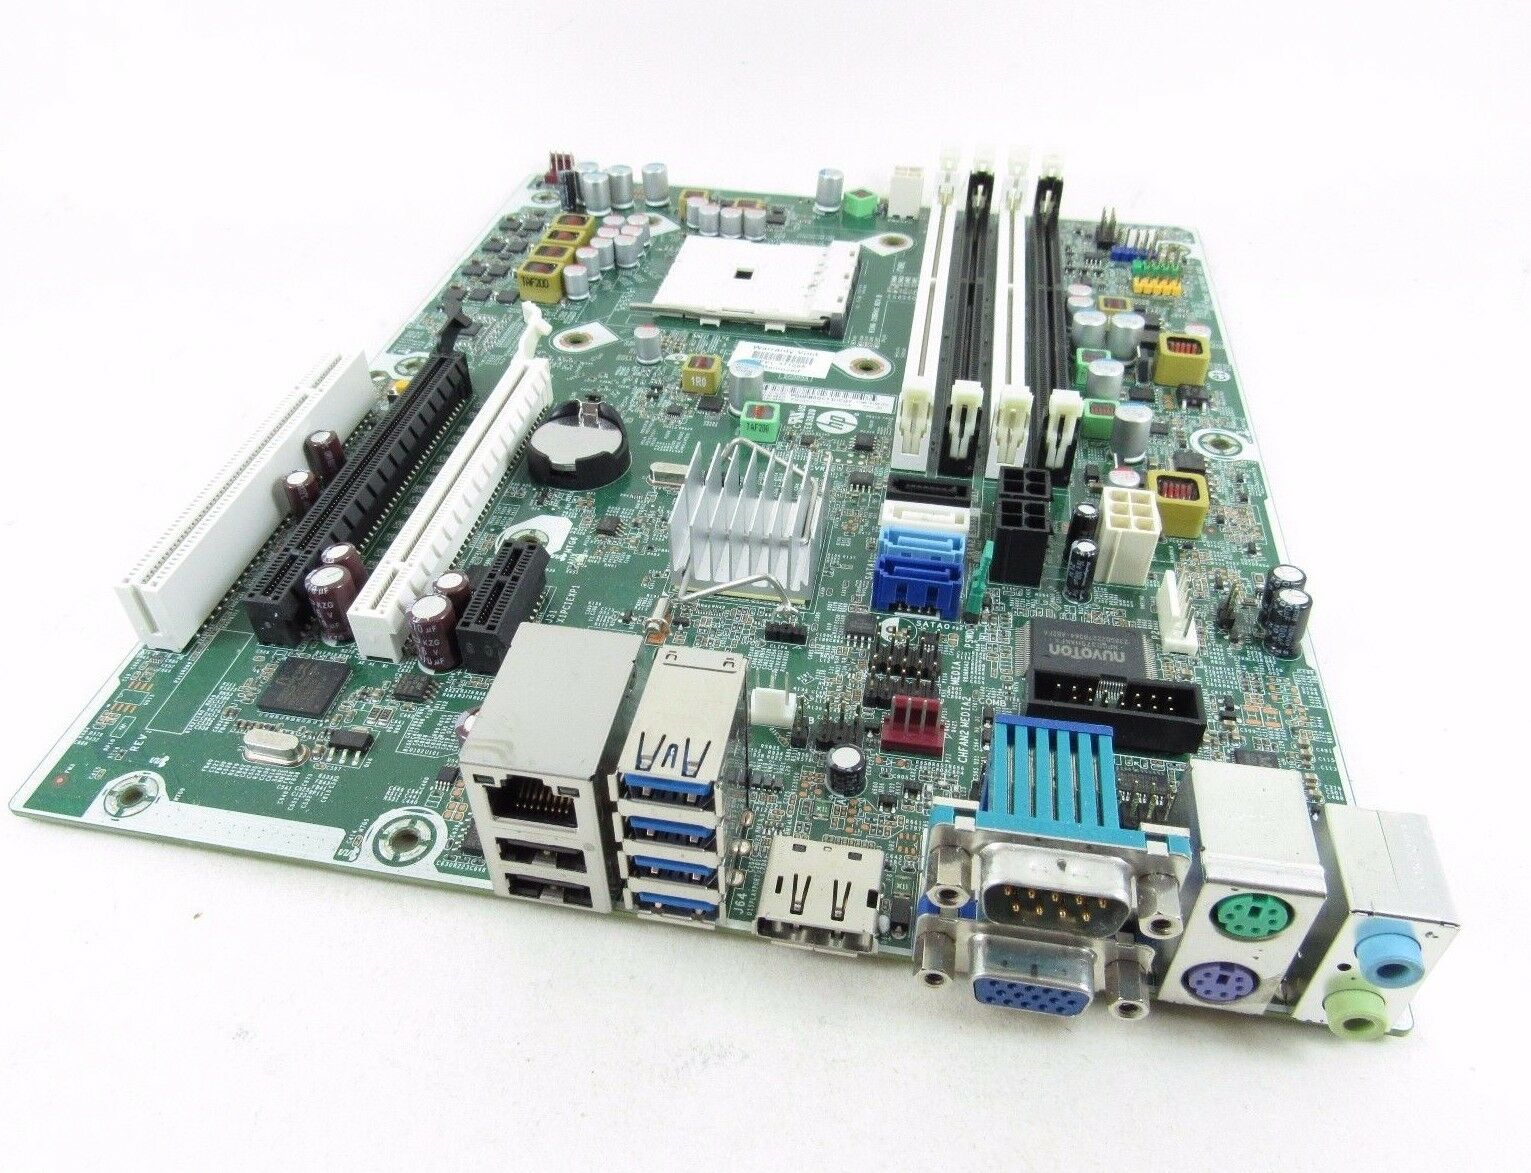 HP COMPAQ PRO System Motherboard 6305 Sff Main Board 715183-001 fully functional